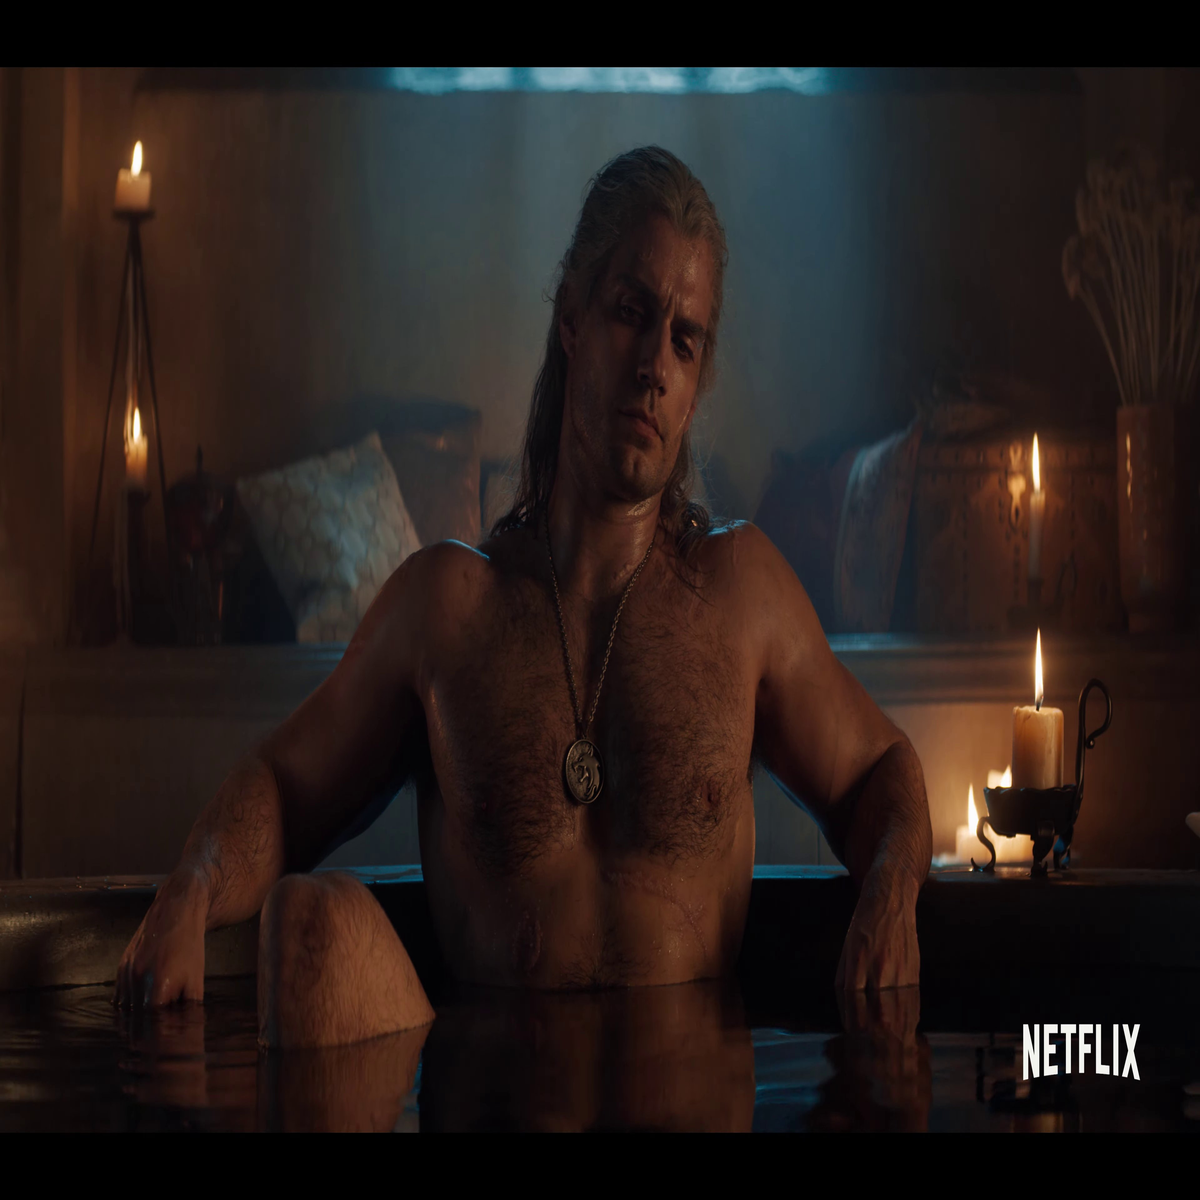 The Witcher': Henry Cavill to be replaced as Geralt by Liam Hemsworth in  season 4